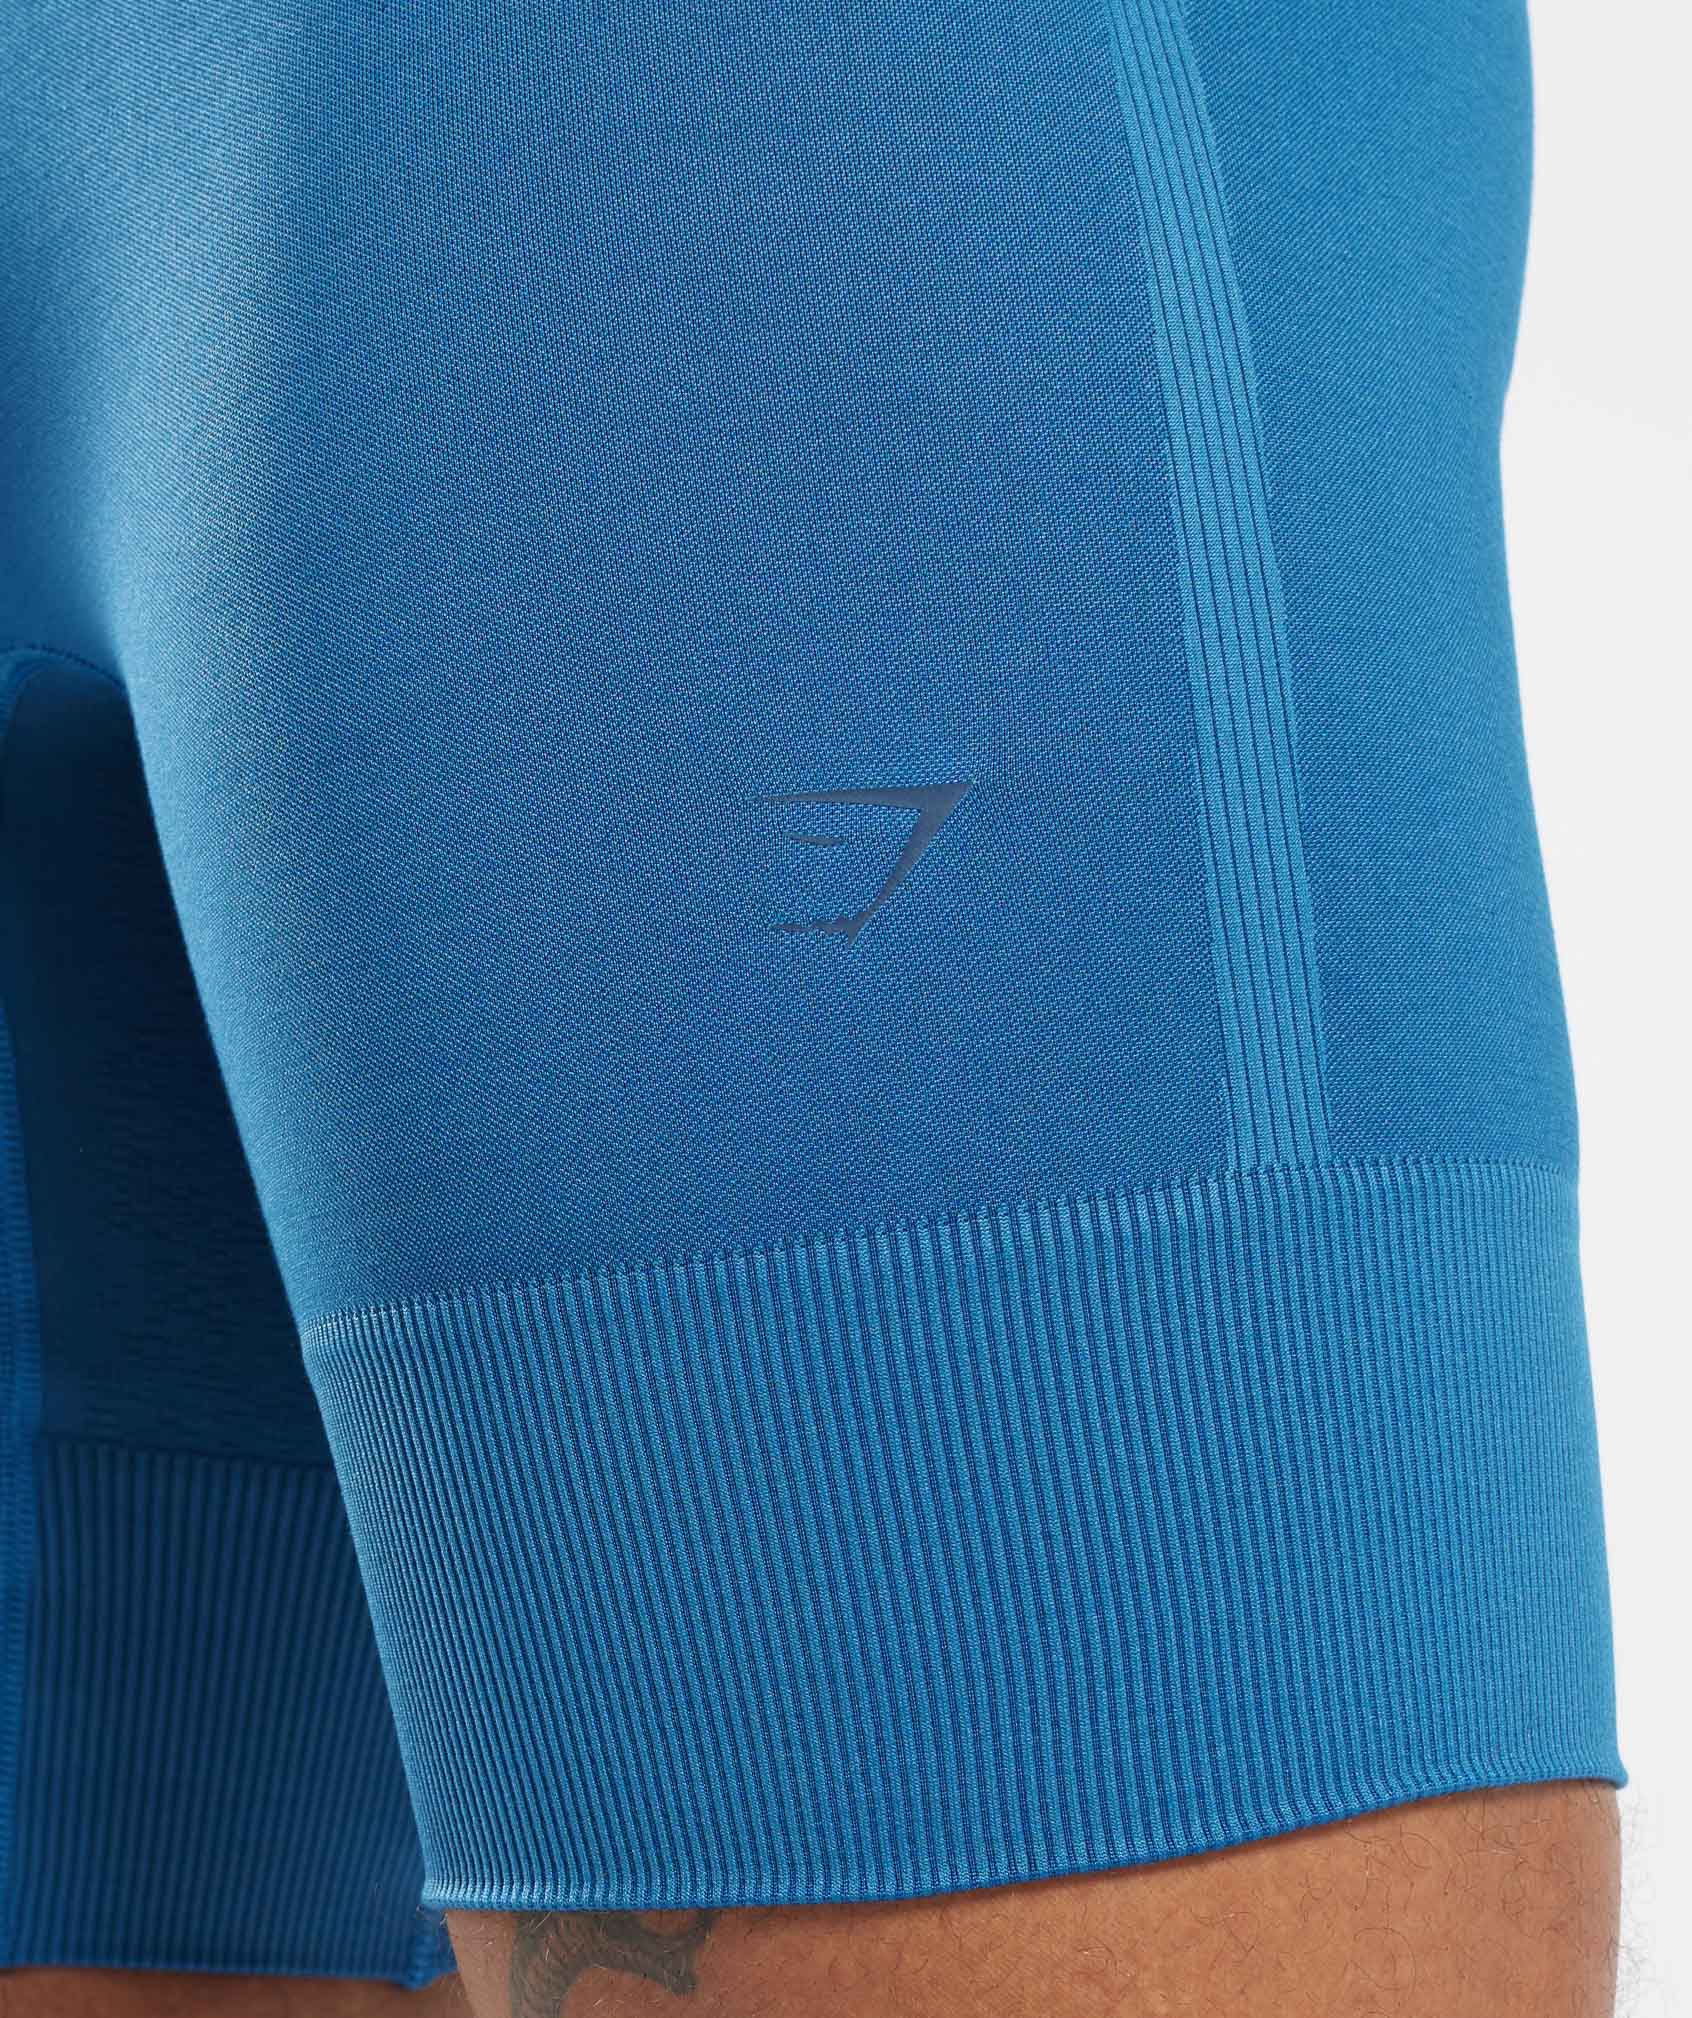 Running Seamless 7" Shorts in Lakeside Blue - view 6